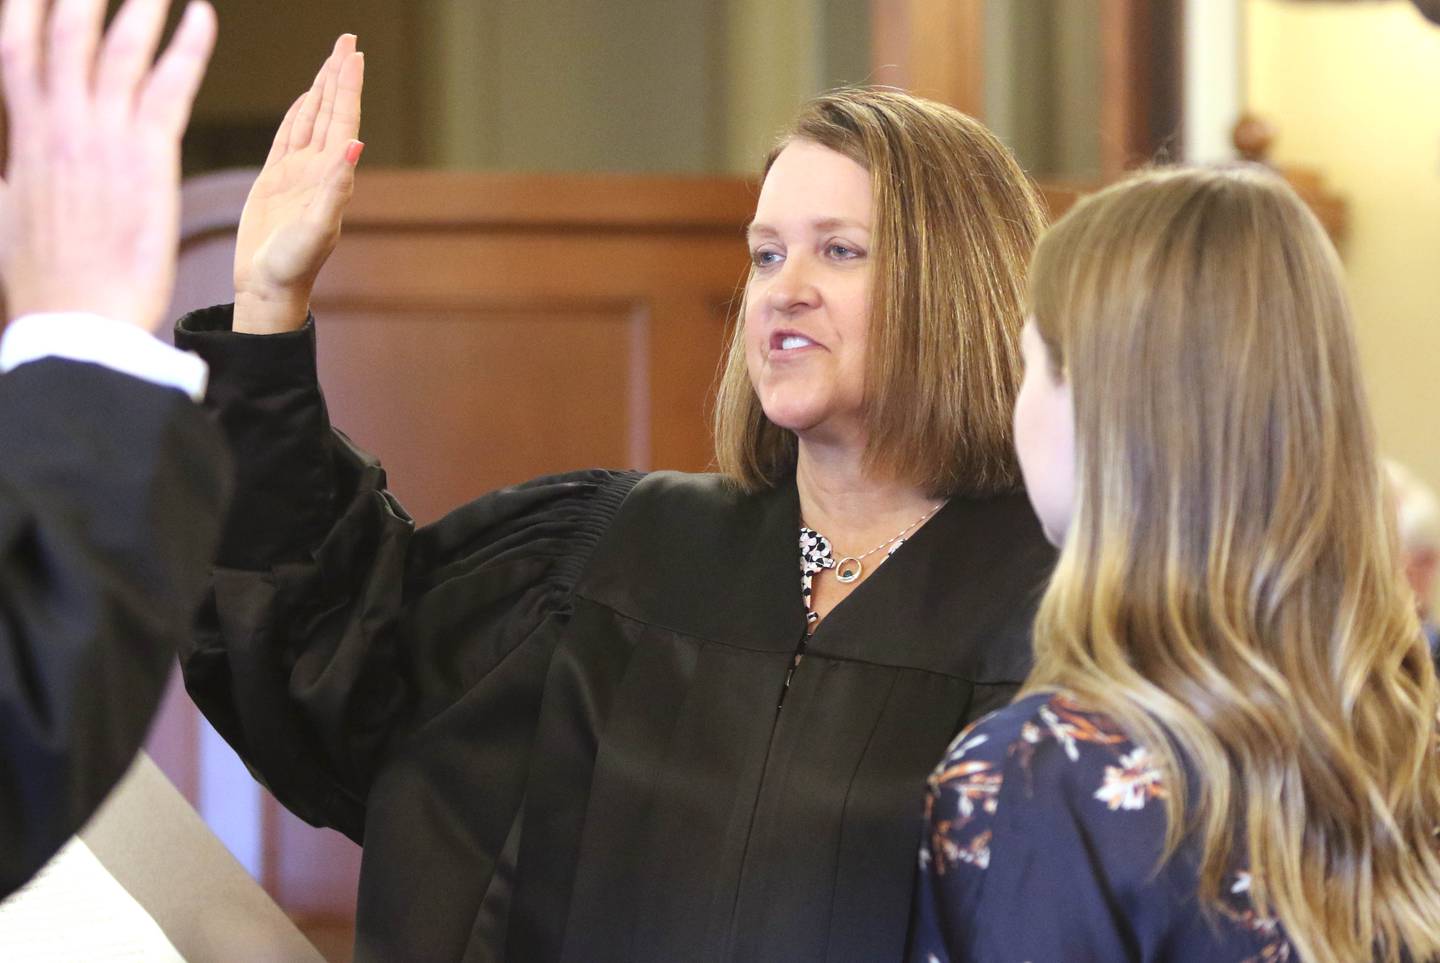 DeKalb County Judge Bradley Waller swears in Marcy Buick as a Judge in the 23rd Judicial Circuit Court Friday in Courtroom 300 at the DeKalb County Courthouse as her daughter Alison, 27, looks on. Buick is filling the void left when Judge Robbin Stuckert retired.